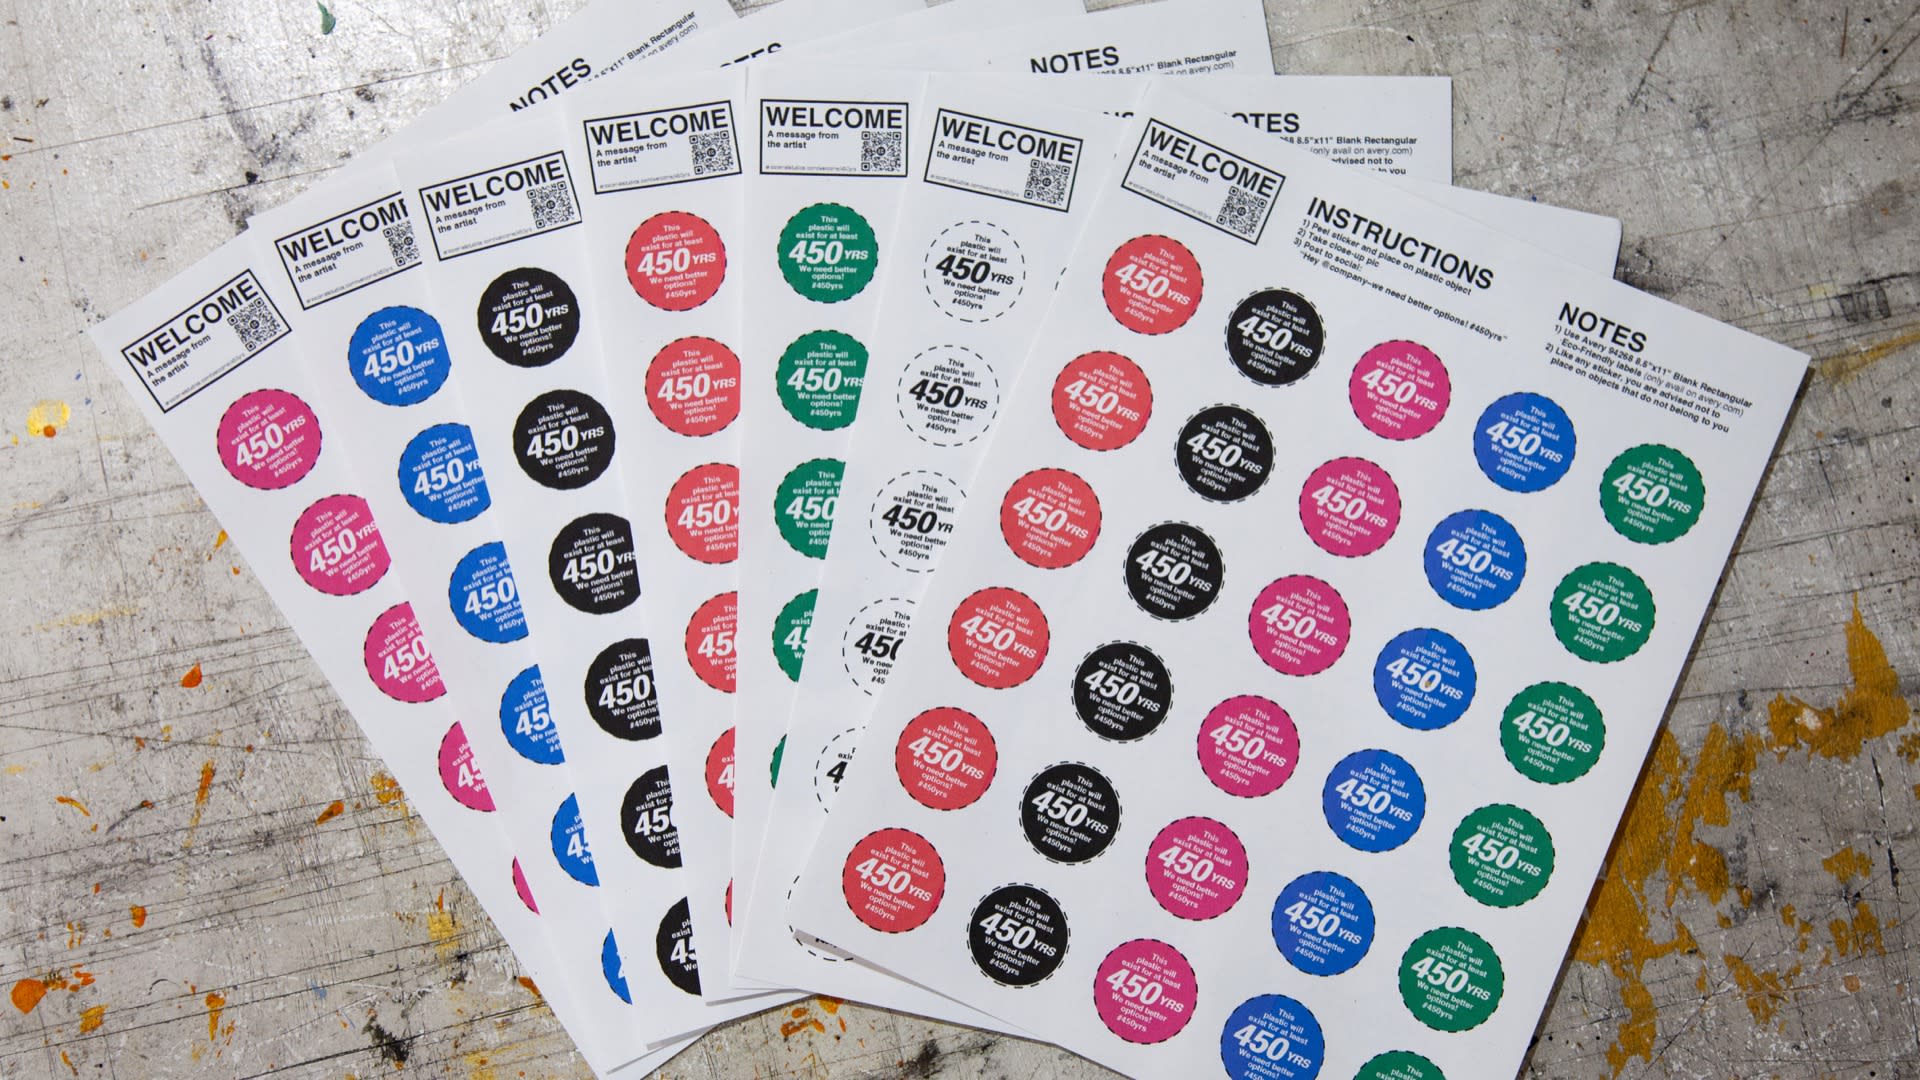 Photograph of seven 8.5 inch by 11 inch pieces of paper, laid out in a fan-like fashion, on a workbench. Each sheet shows contains 30 DIY, approximately 1.5 inch diameter stickers. Individual stickers are circular in nature, come in either red, green, blue, magenta, black, and white and the all say the same thing: 'This plastic will exist for at least 450YRS. We need better options! #450yrs '